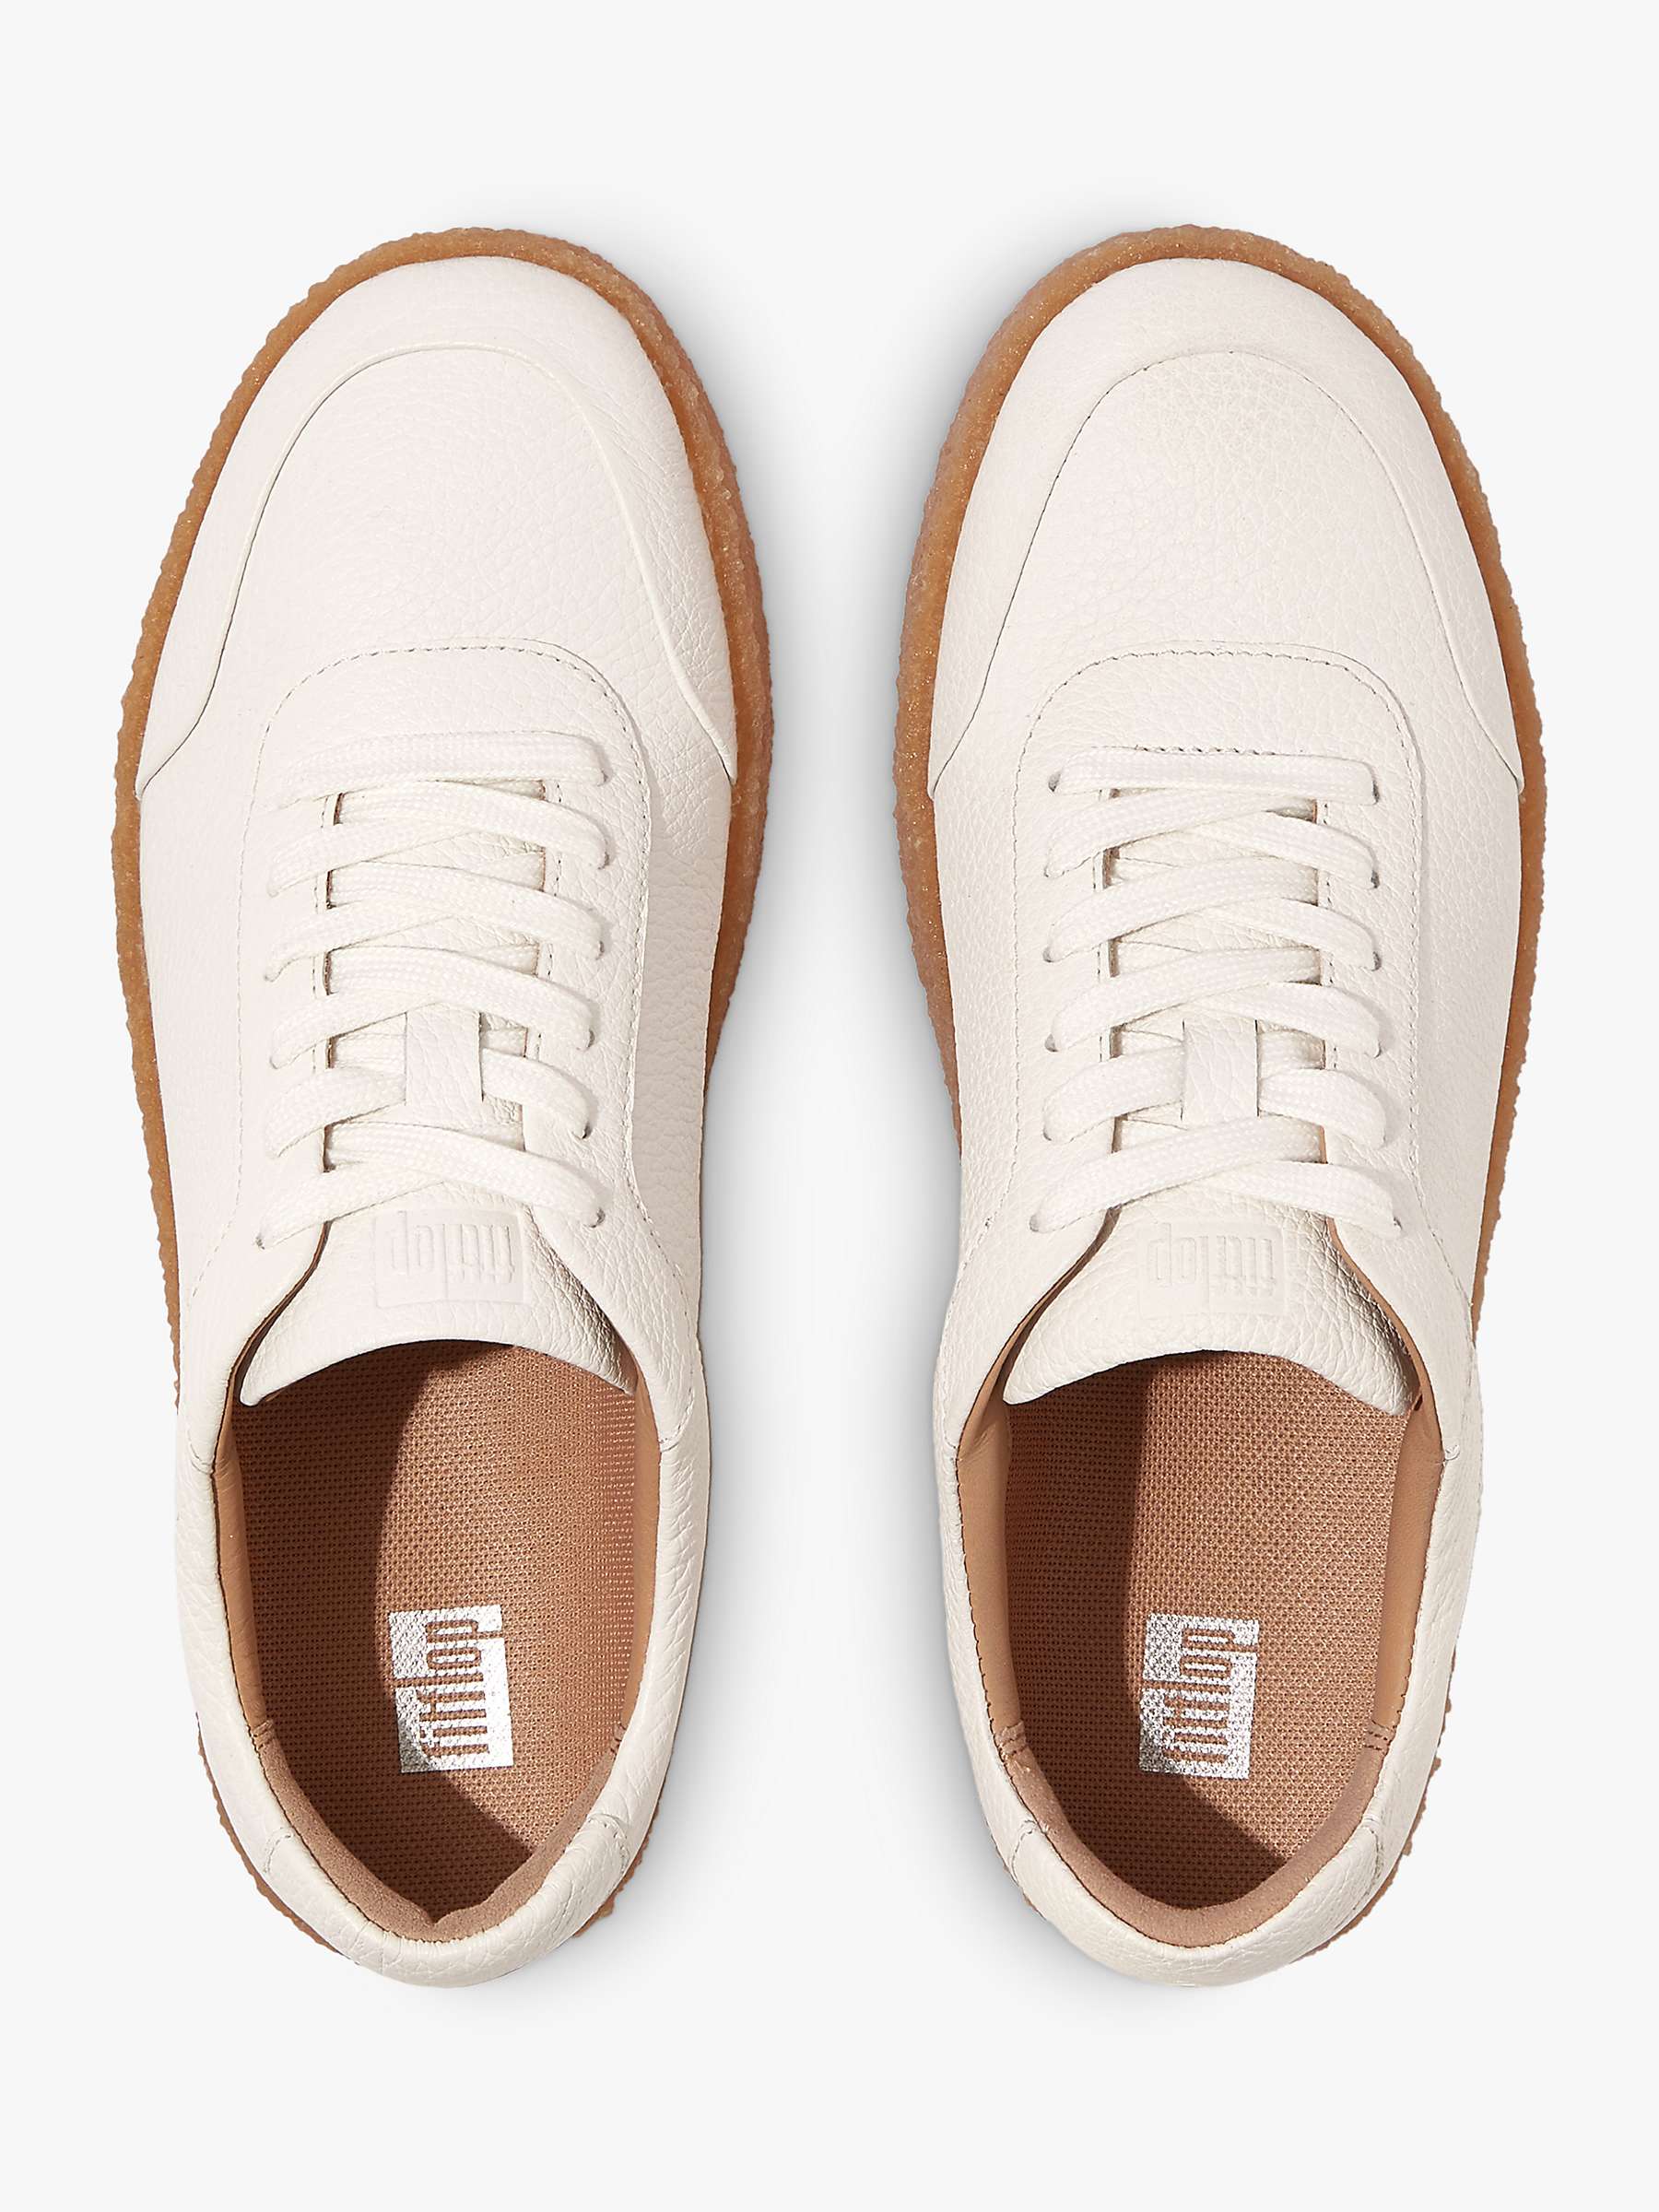 Buy FitFlop Rally Crepe Leather Trainers Online at johnlewis.com